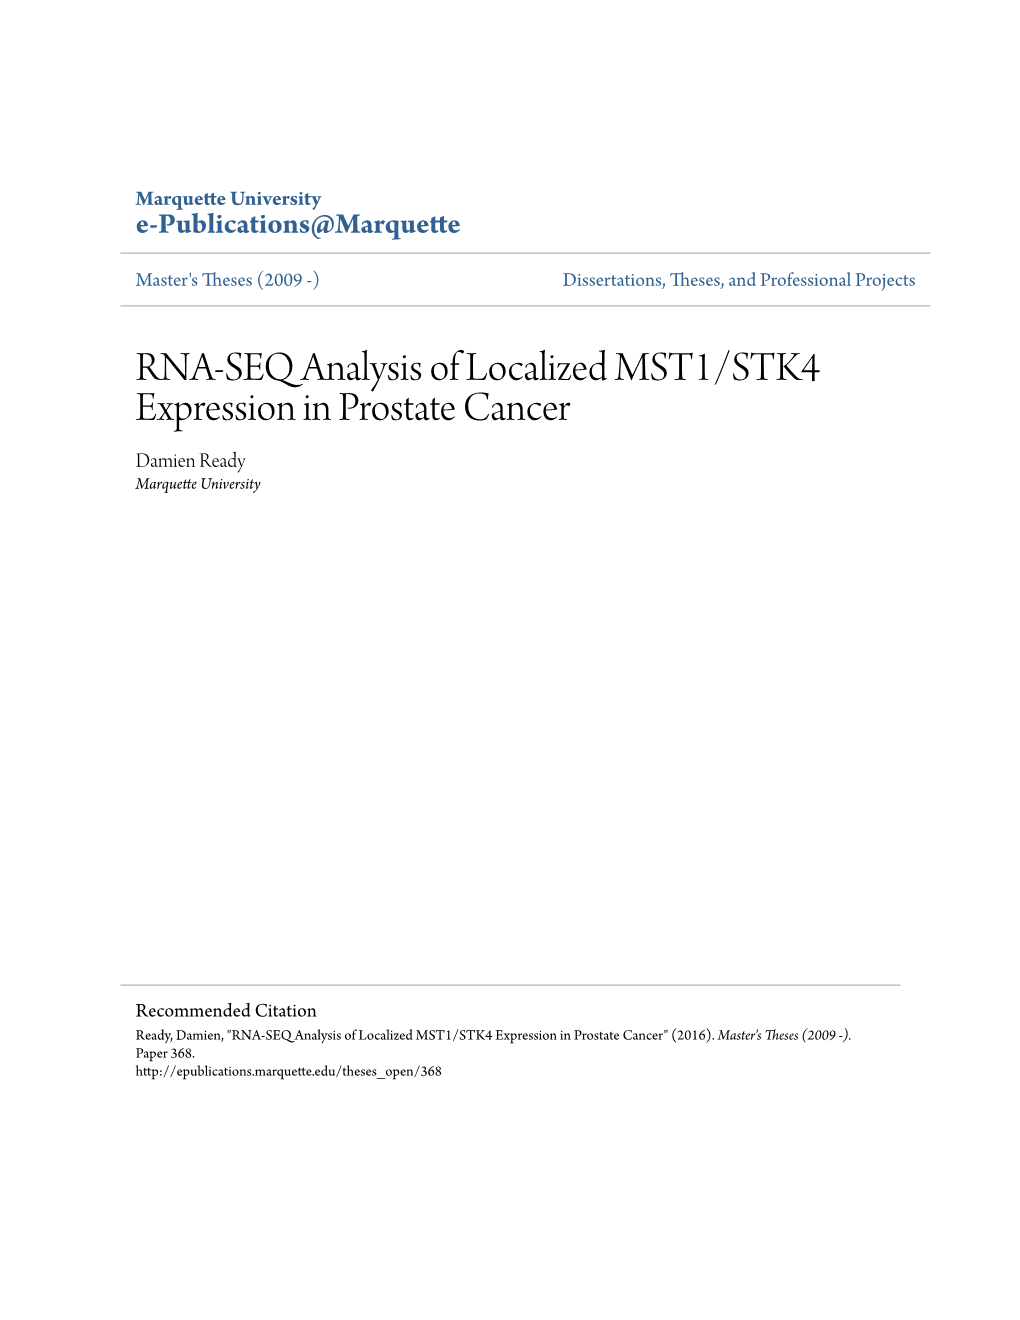 RNA-SEQ Analysis of Localized MST1/STK4 Expression in Prostate Cancer Damien Ready Marquette University